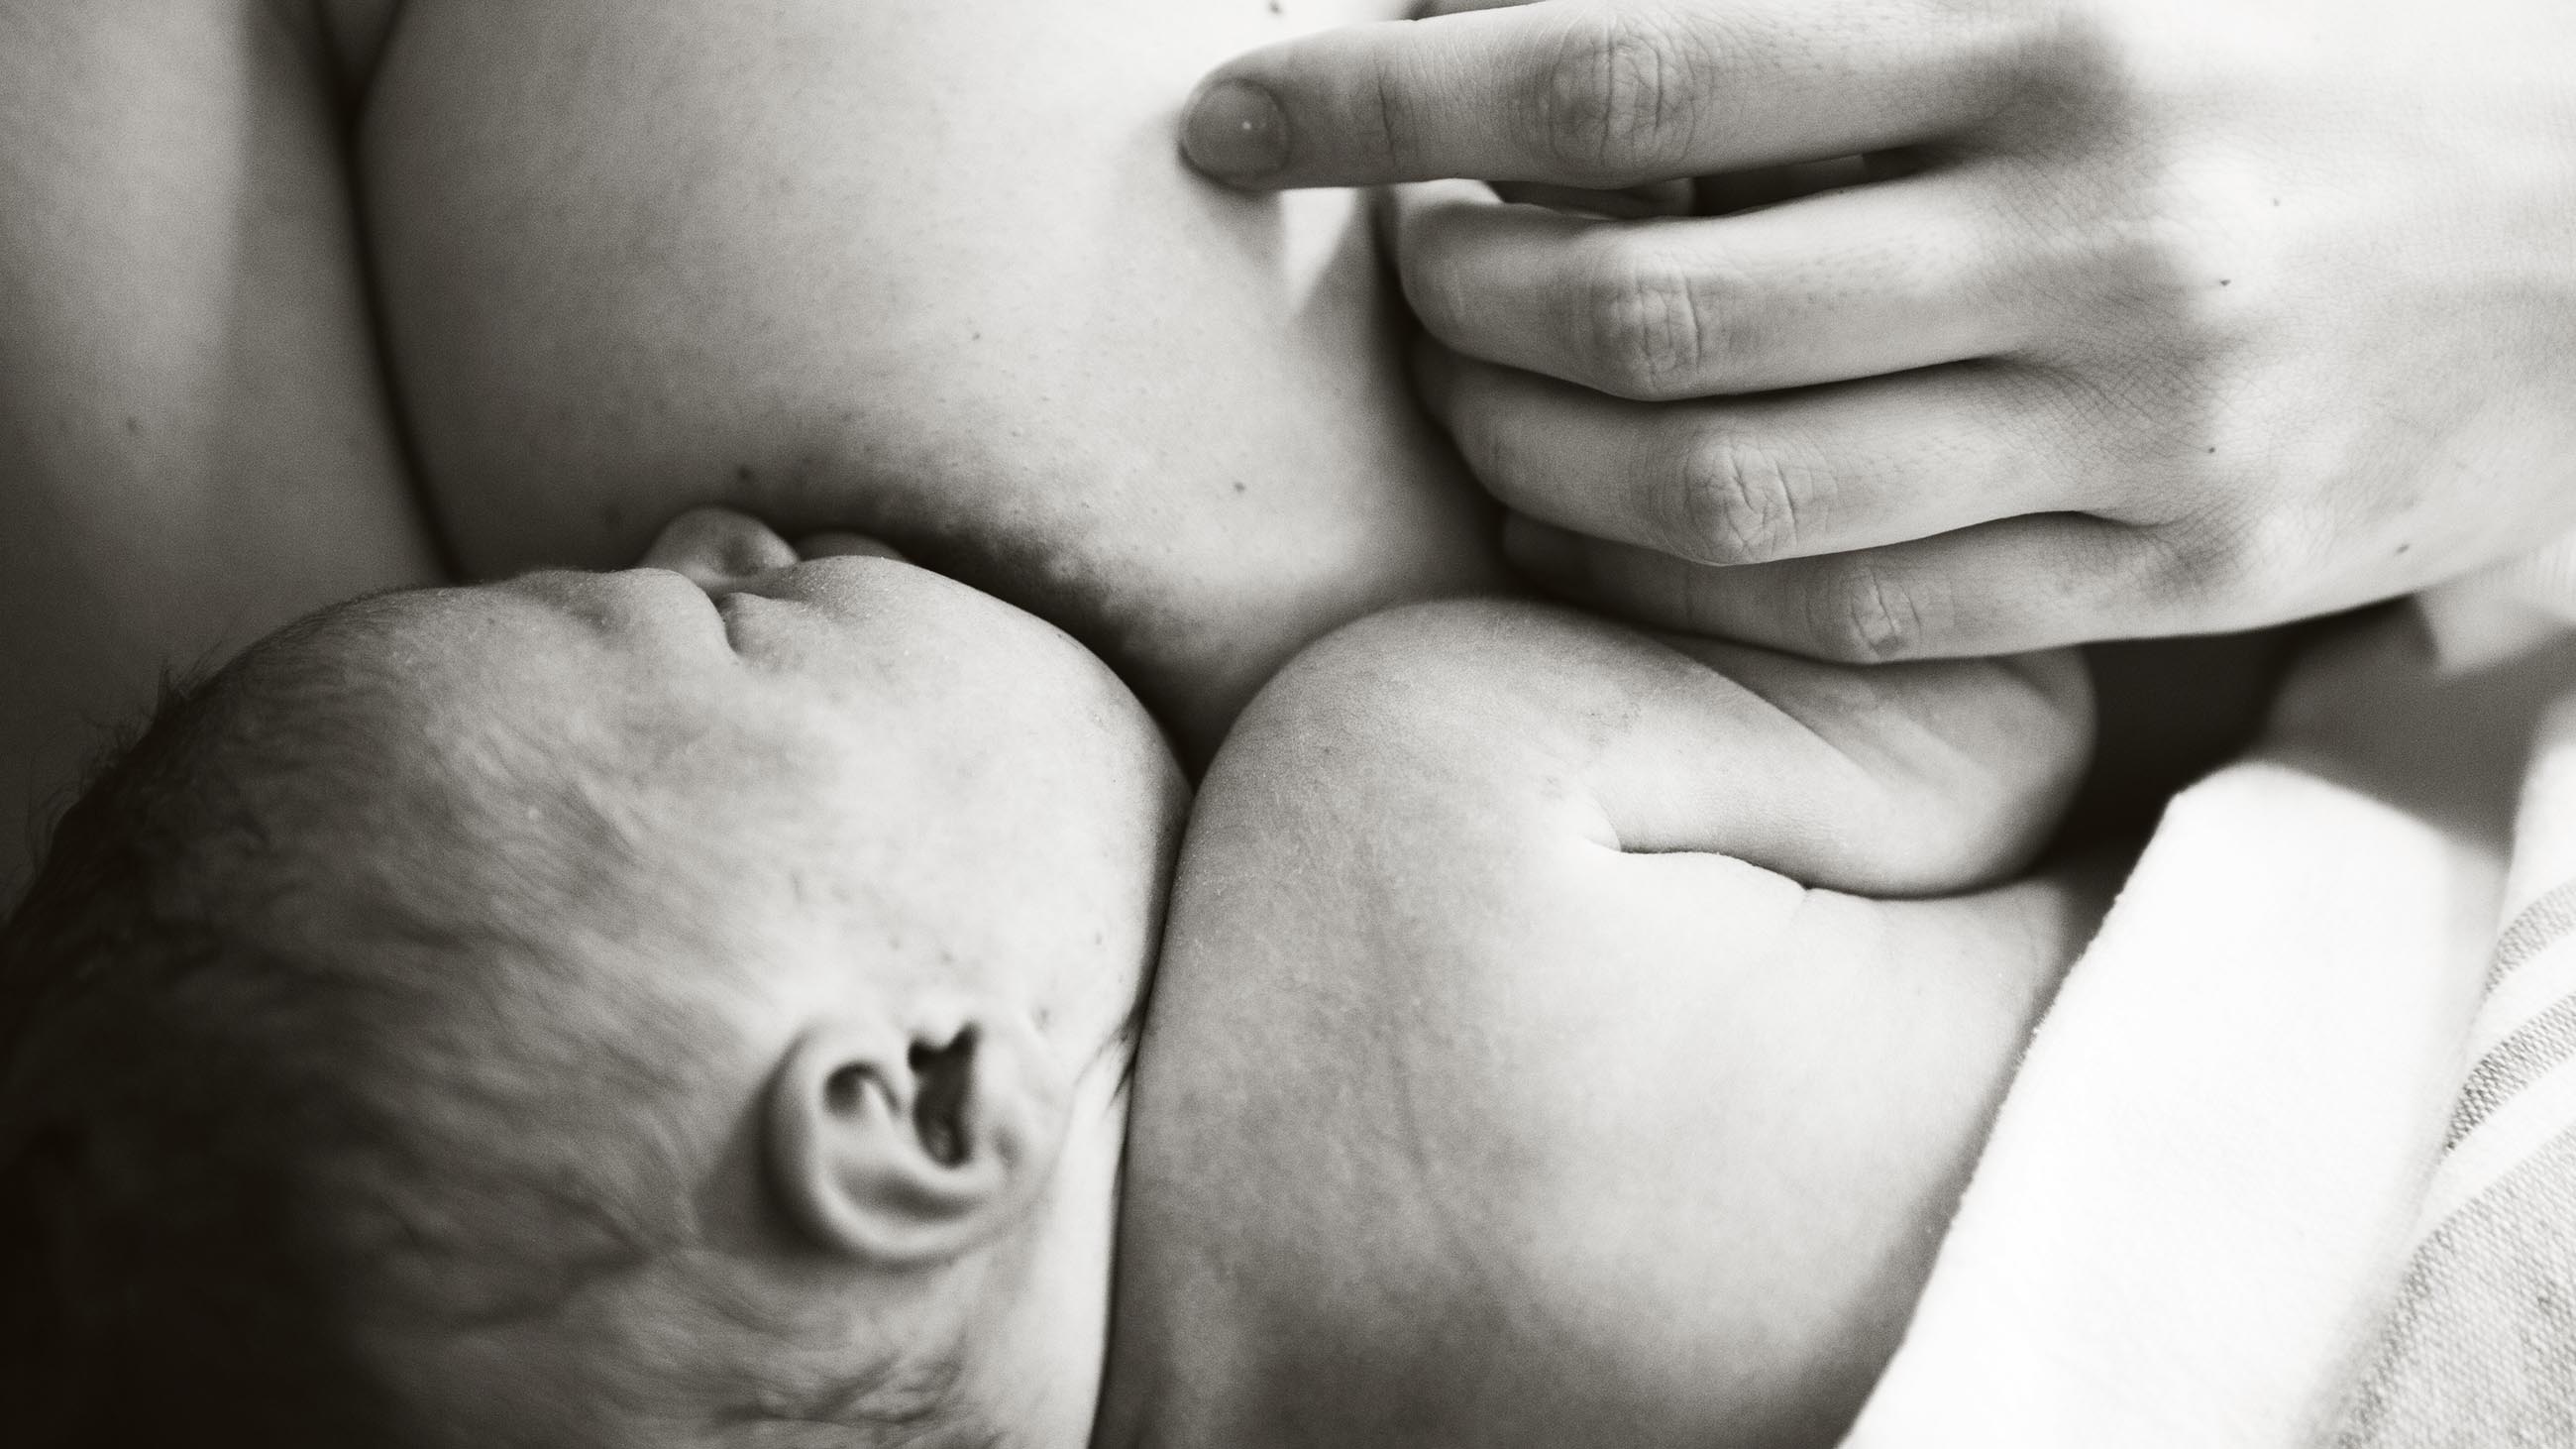 Could environmental factors play a role in making it more difficult to produce breastmilk?